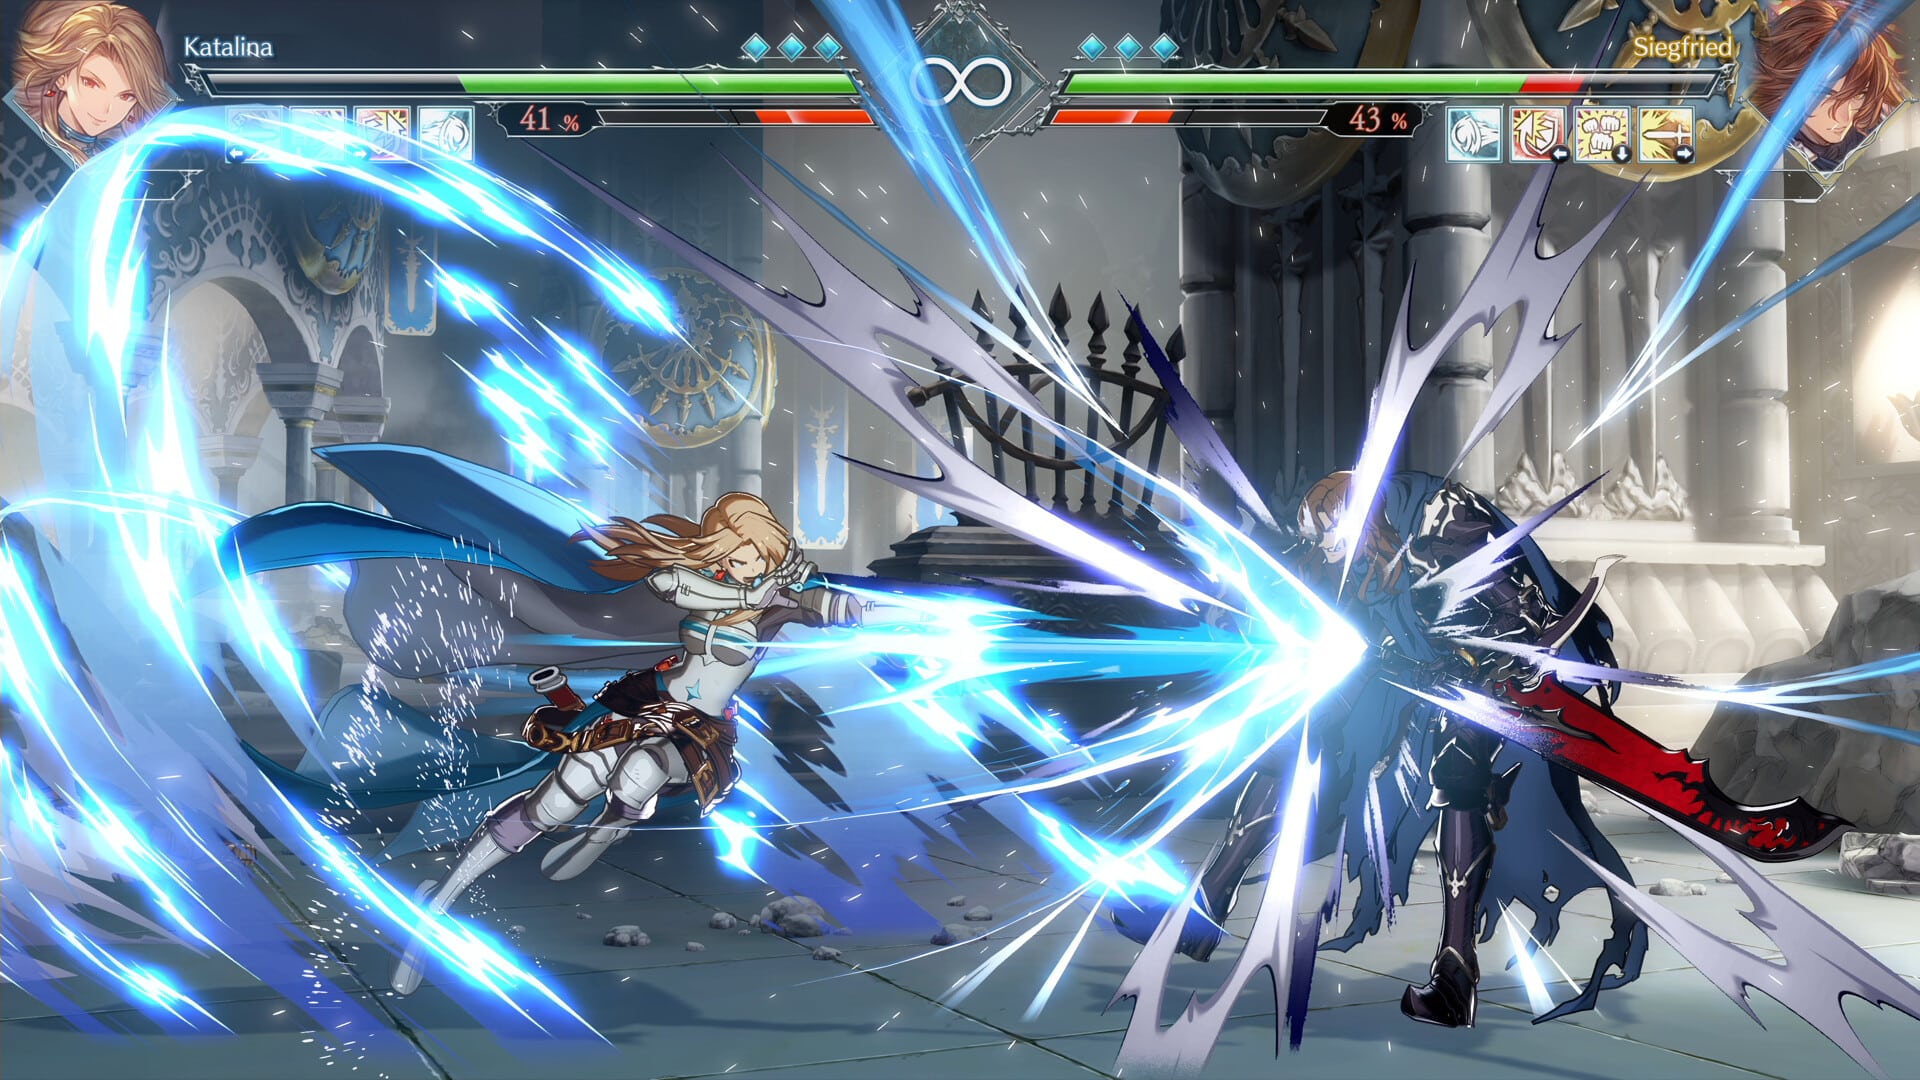 Granblue Fantasy Versus: Rising Review - A Flurry of Action